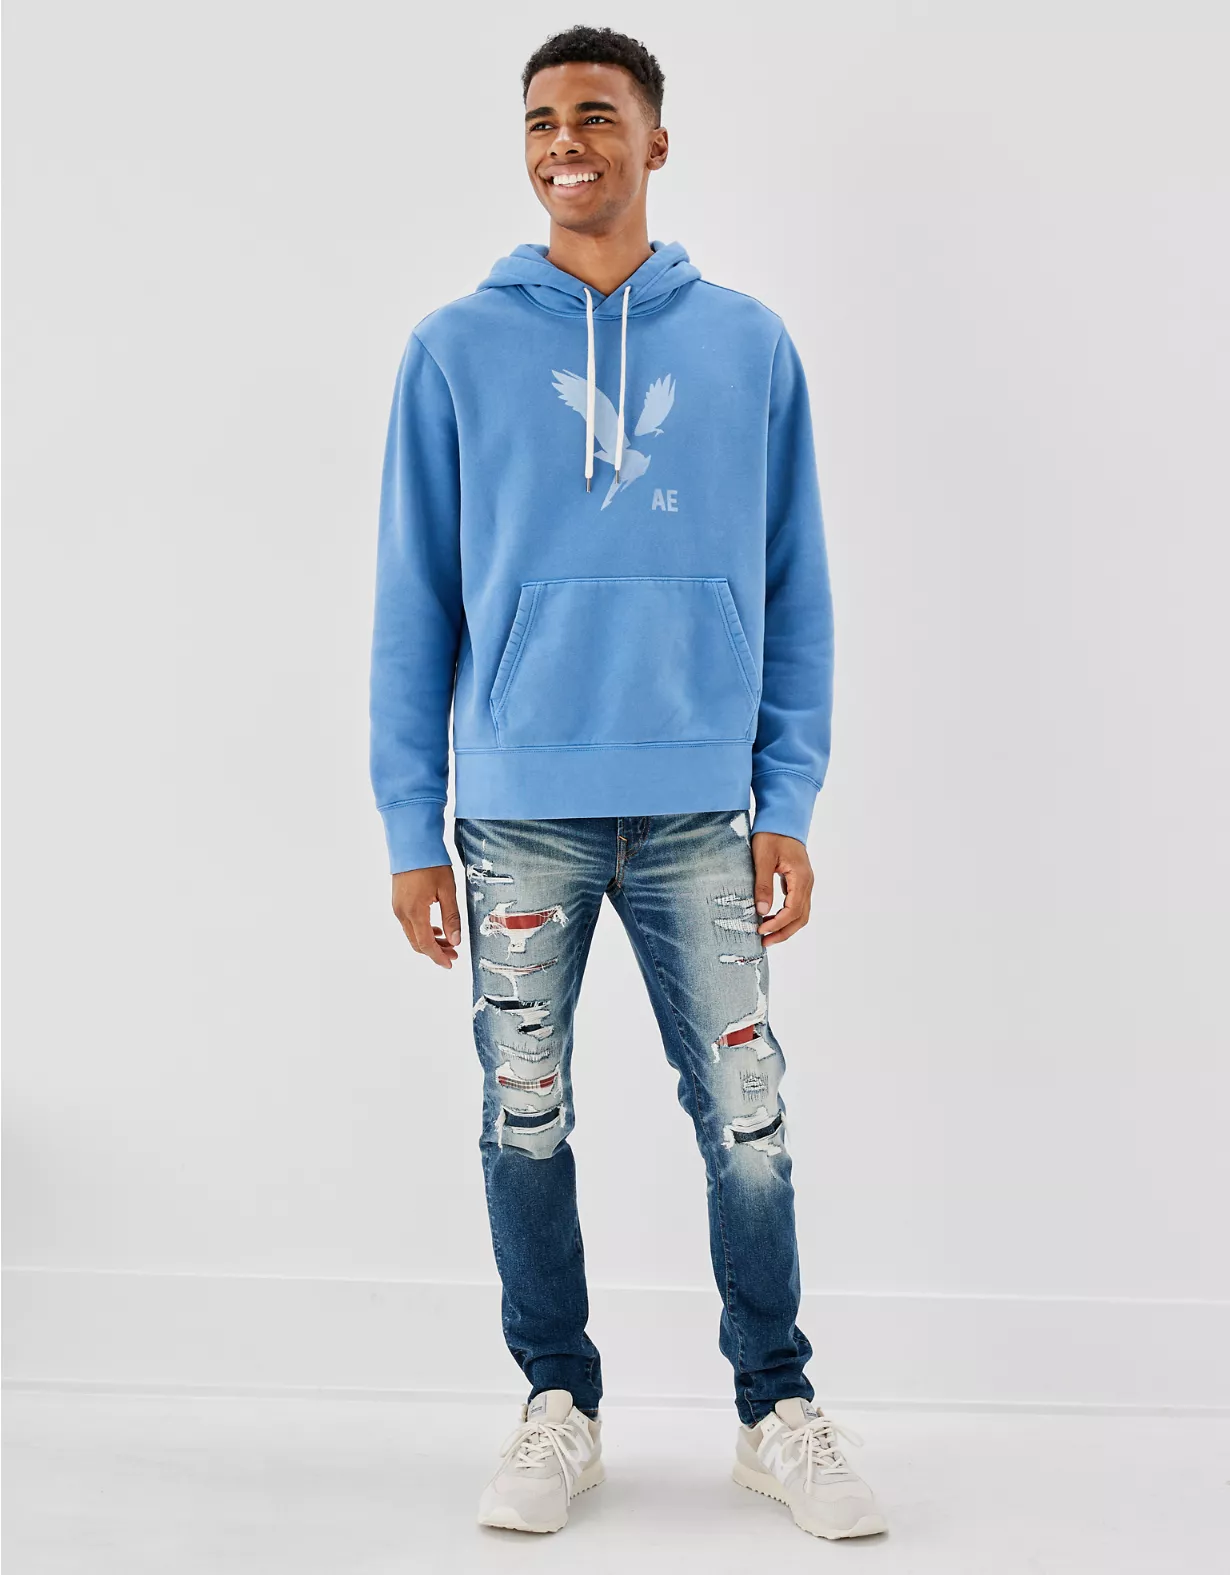 AE AirFlex 360 Patched Skinny Jean